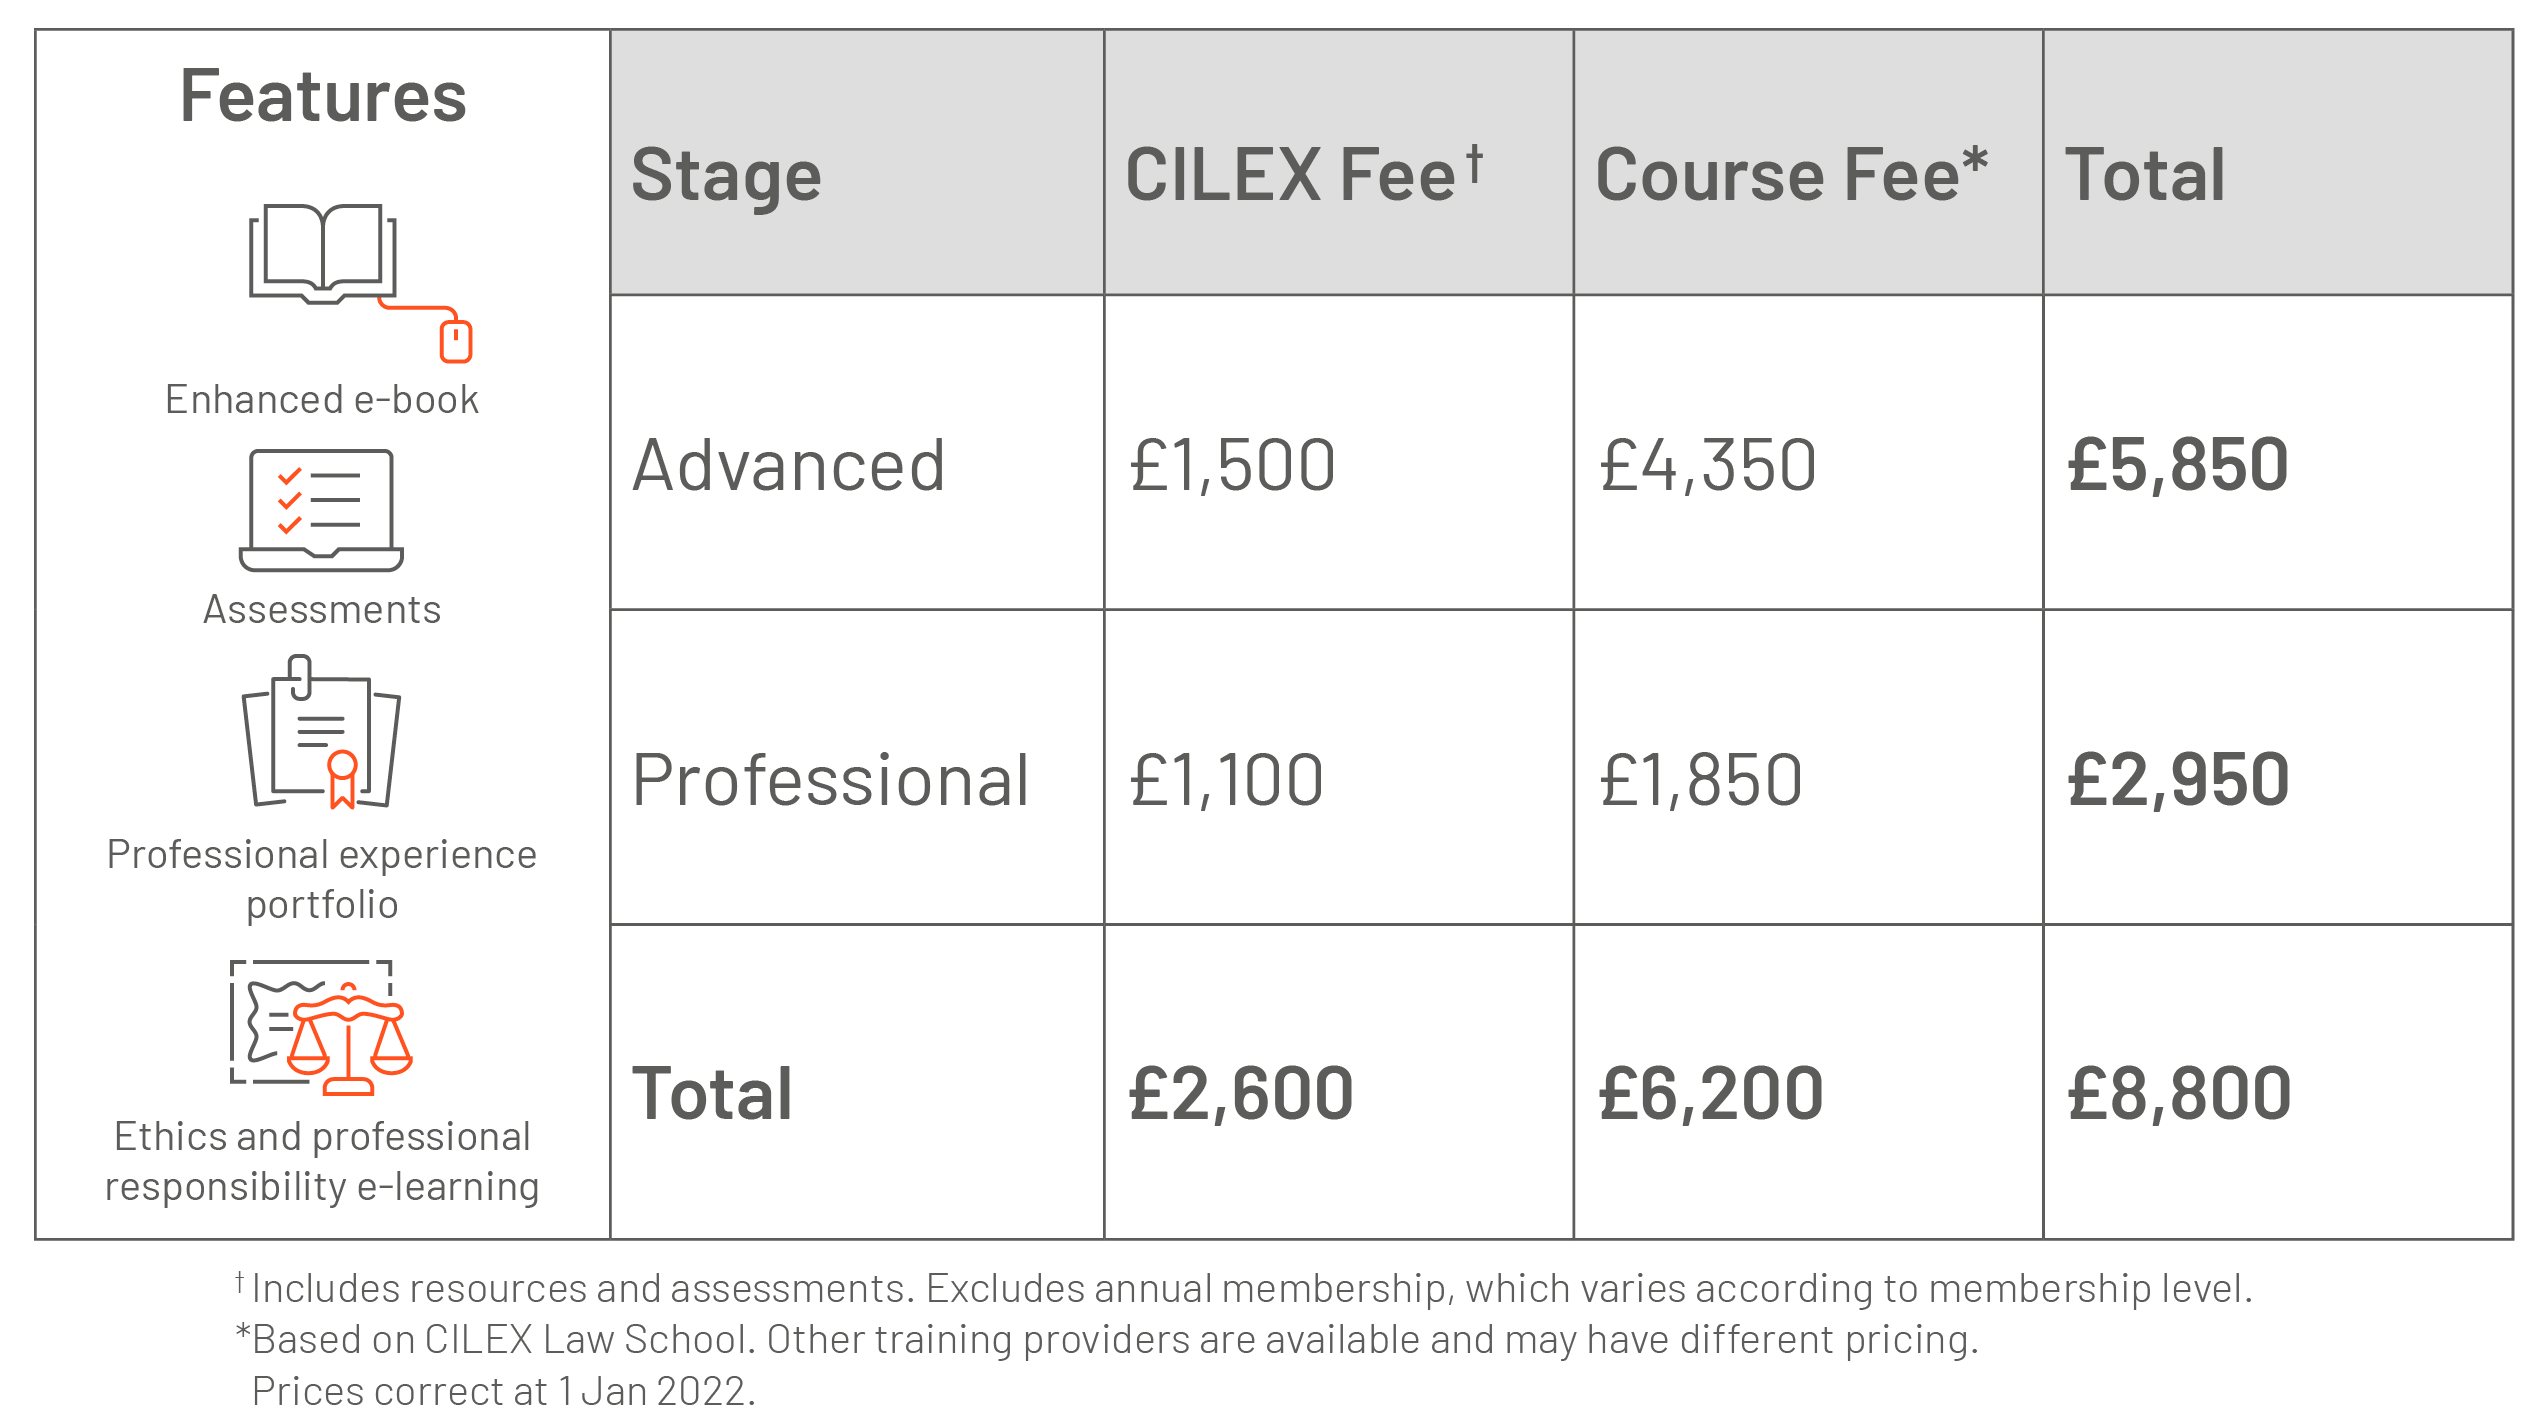 CPQ Prices: CPQ Advanced = £5,850. CPQ Professional = £2,950. Total = £8,800. Price for each stage includes CILEX Fee for resources and assessments, and Course Fee based on CILEX Law School. Other training providers are available and may have different pricing. Excludes annual membership which varies according to member level. Prices correct at 1 Jan 2020. 